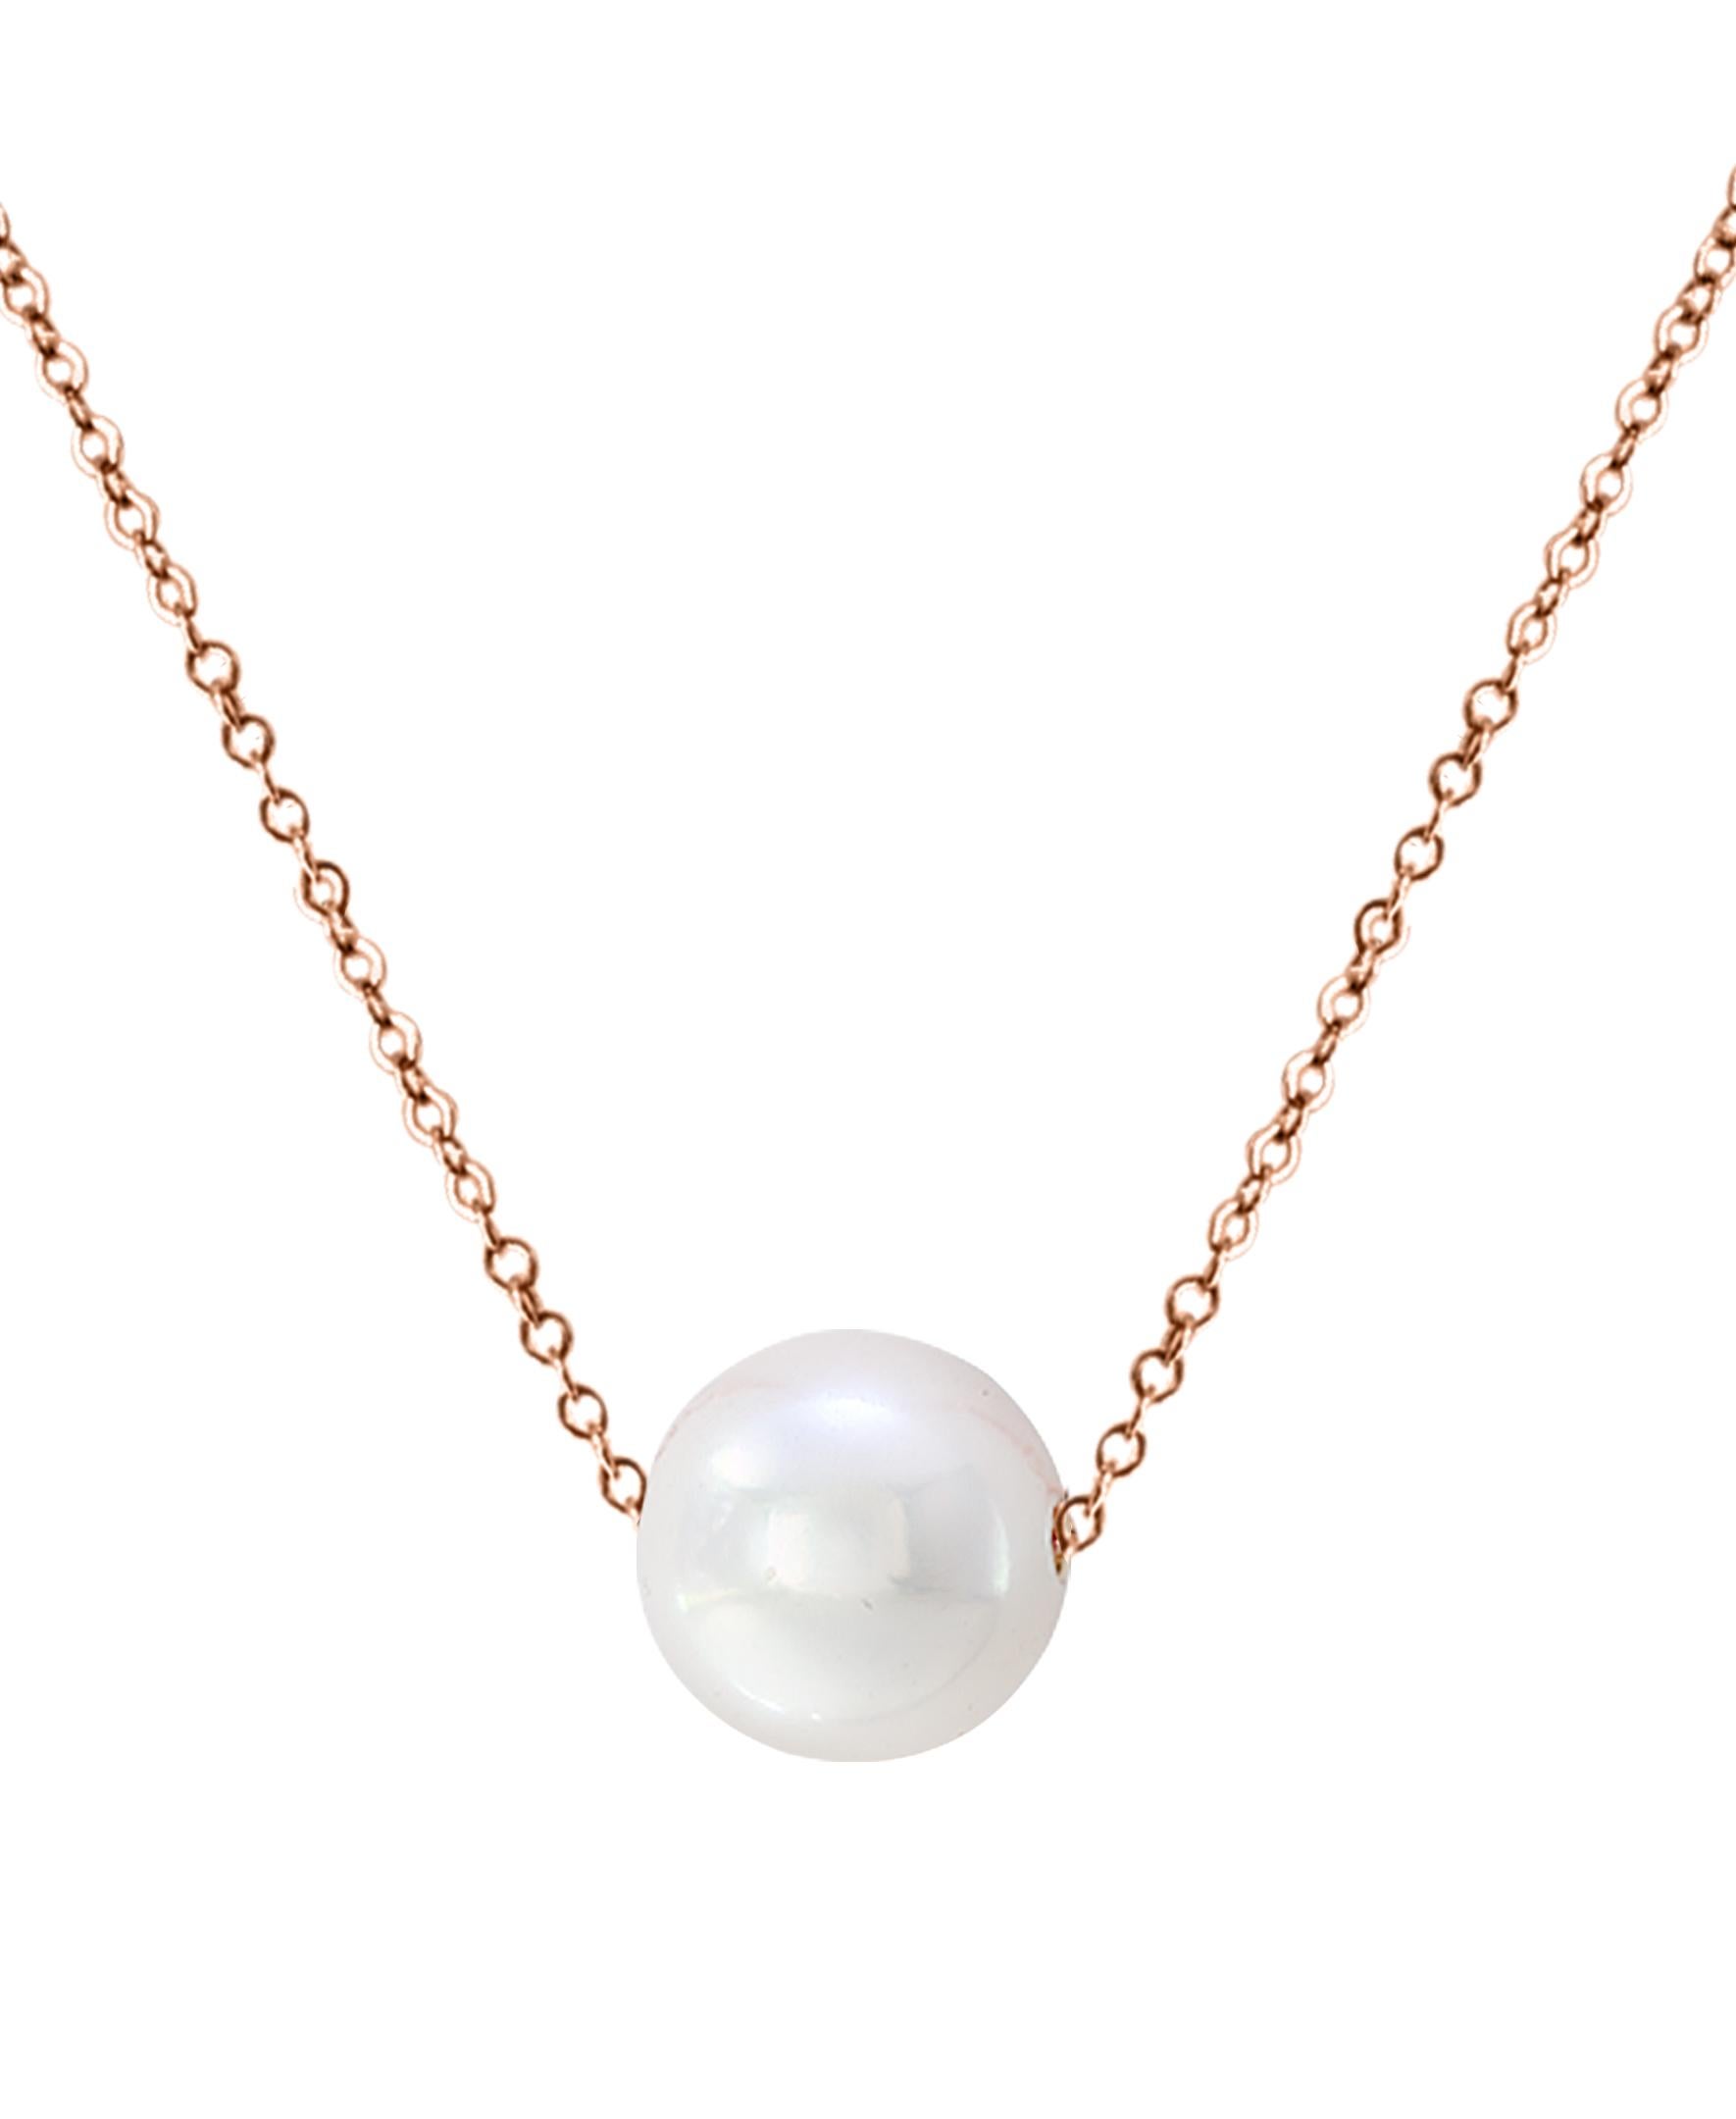 This simple yet elegant pendant features a beautiful, intense, natural-colored, round Freshwater white cultured pearl on a 14 karat Rose gold adjustable length chain. The pearl measures 9-10mm and the chain can be adjusted to as long as 18